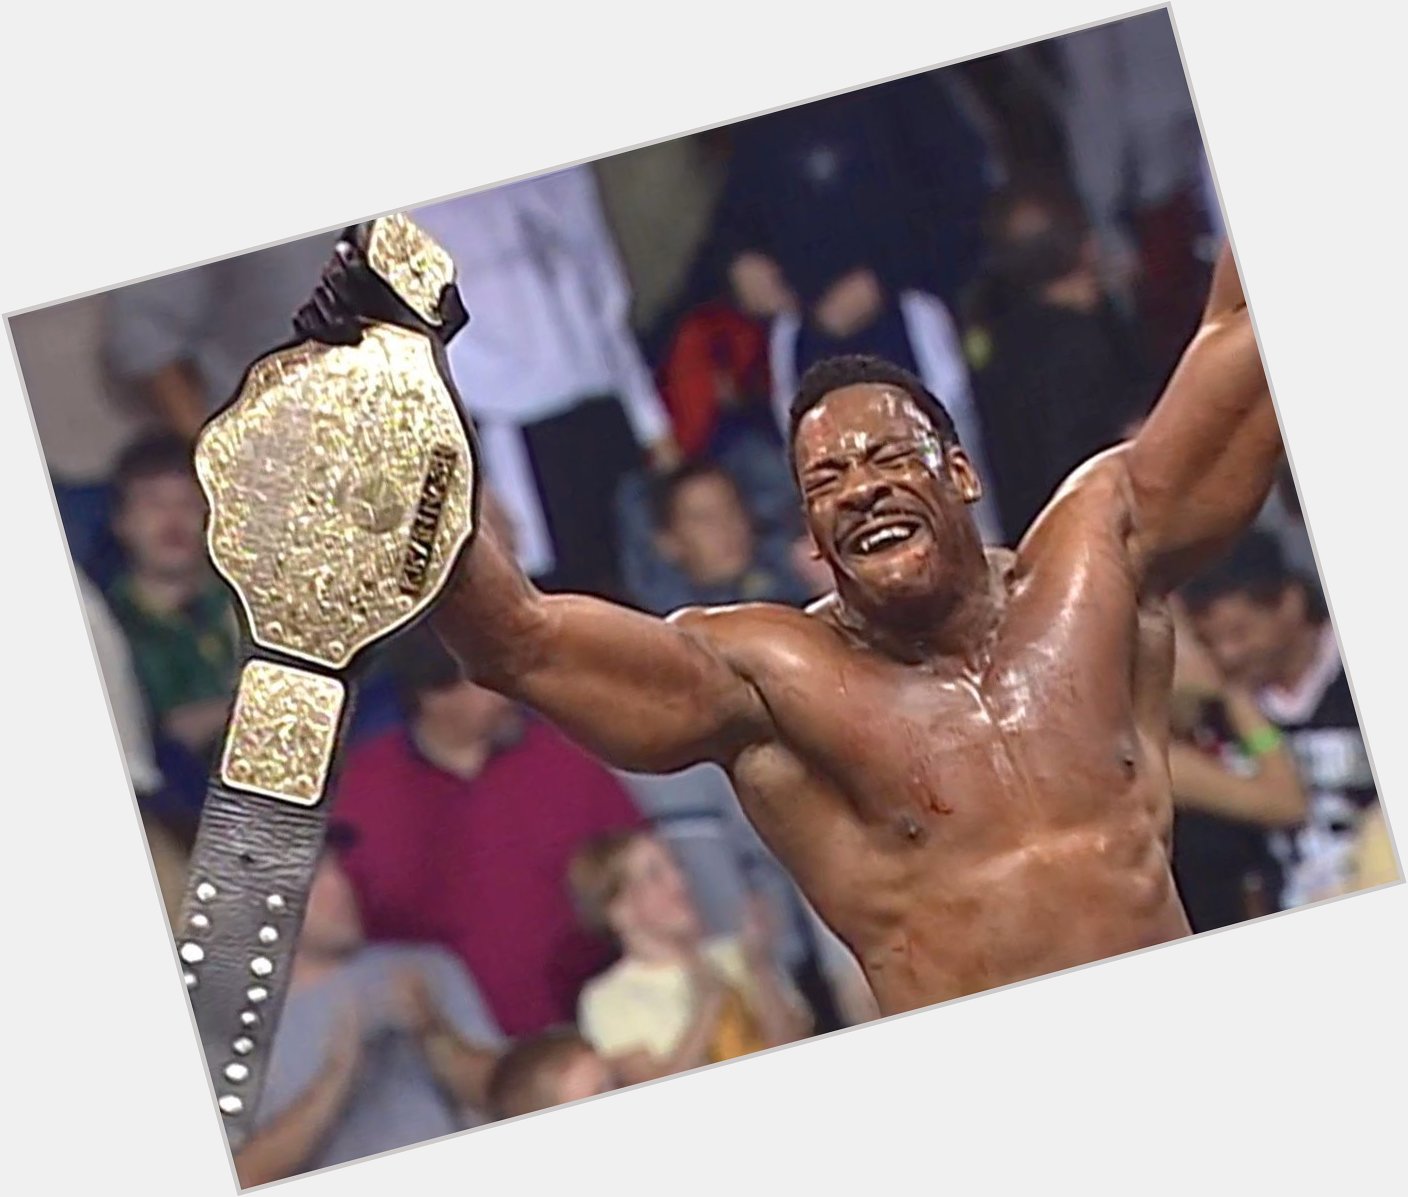 Happy Birthday to the FIVE TIME FIVE TIME FIVE TIME FIVE TIME FIVE TIME WCW Champion Booker T who is 57 today! 